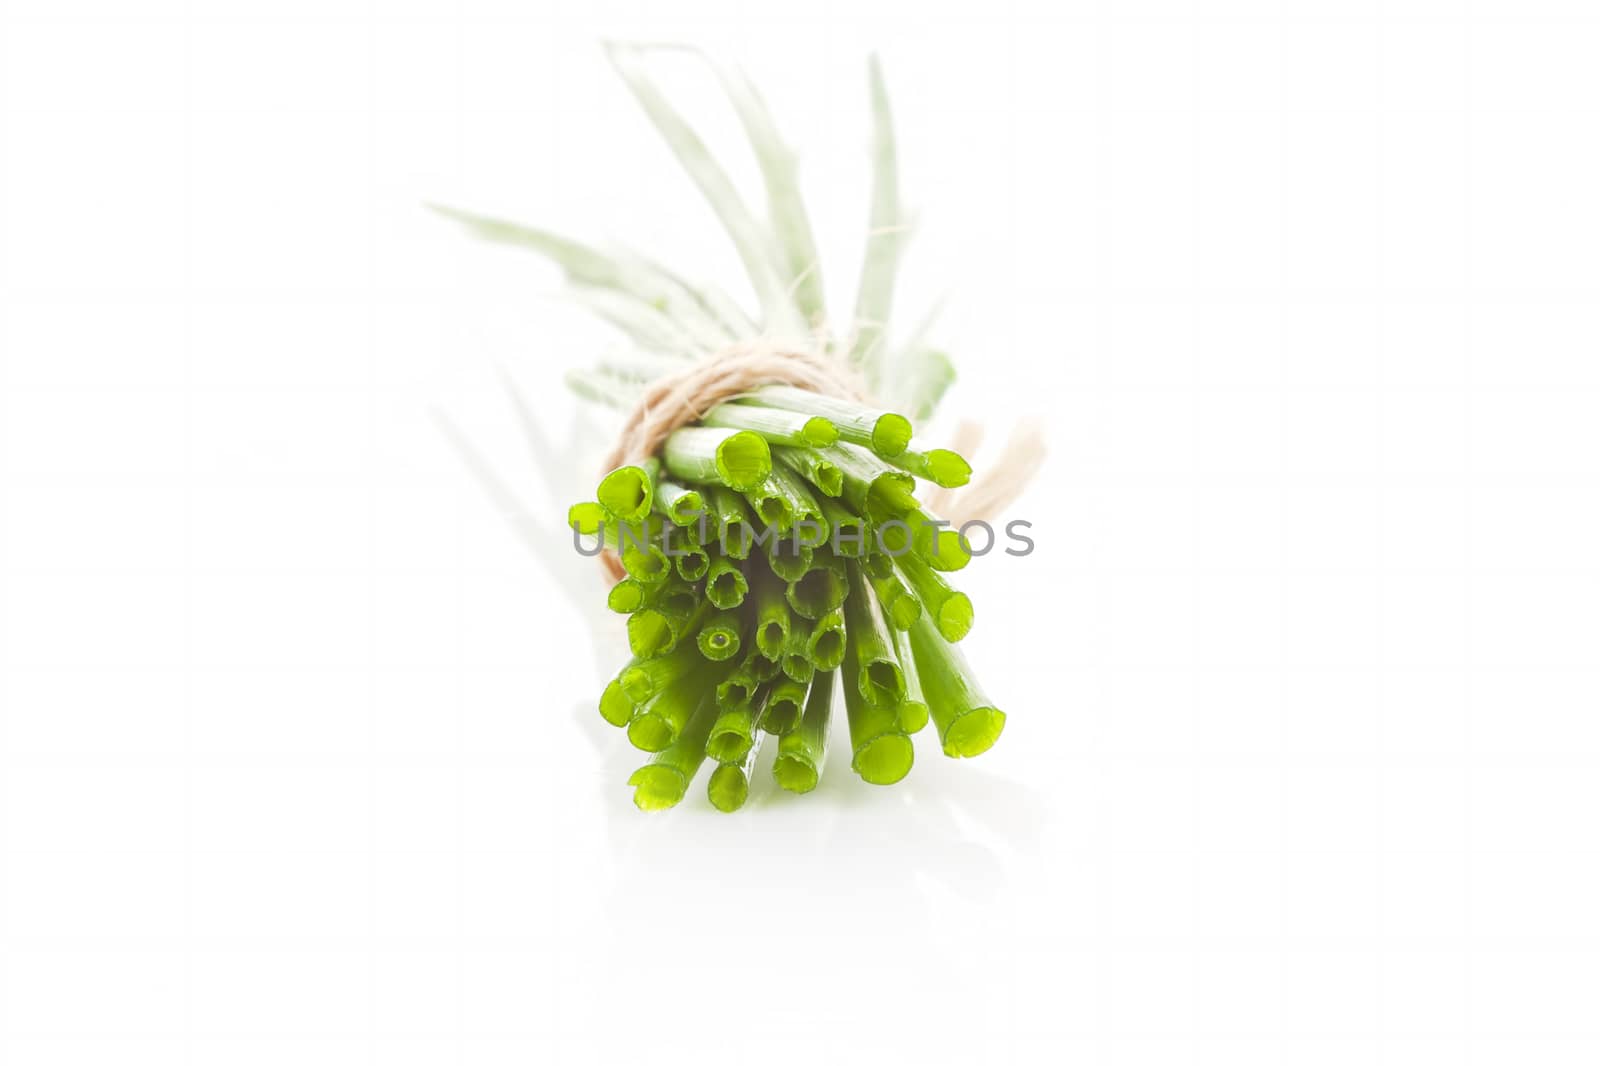 Chive bunch cross section isolated on white background. Aromatic culinary herbs.